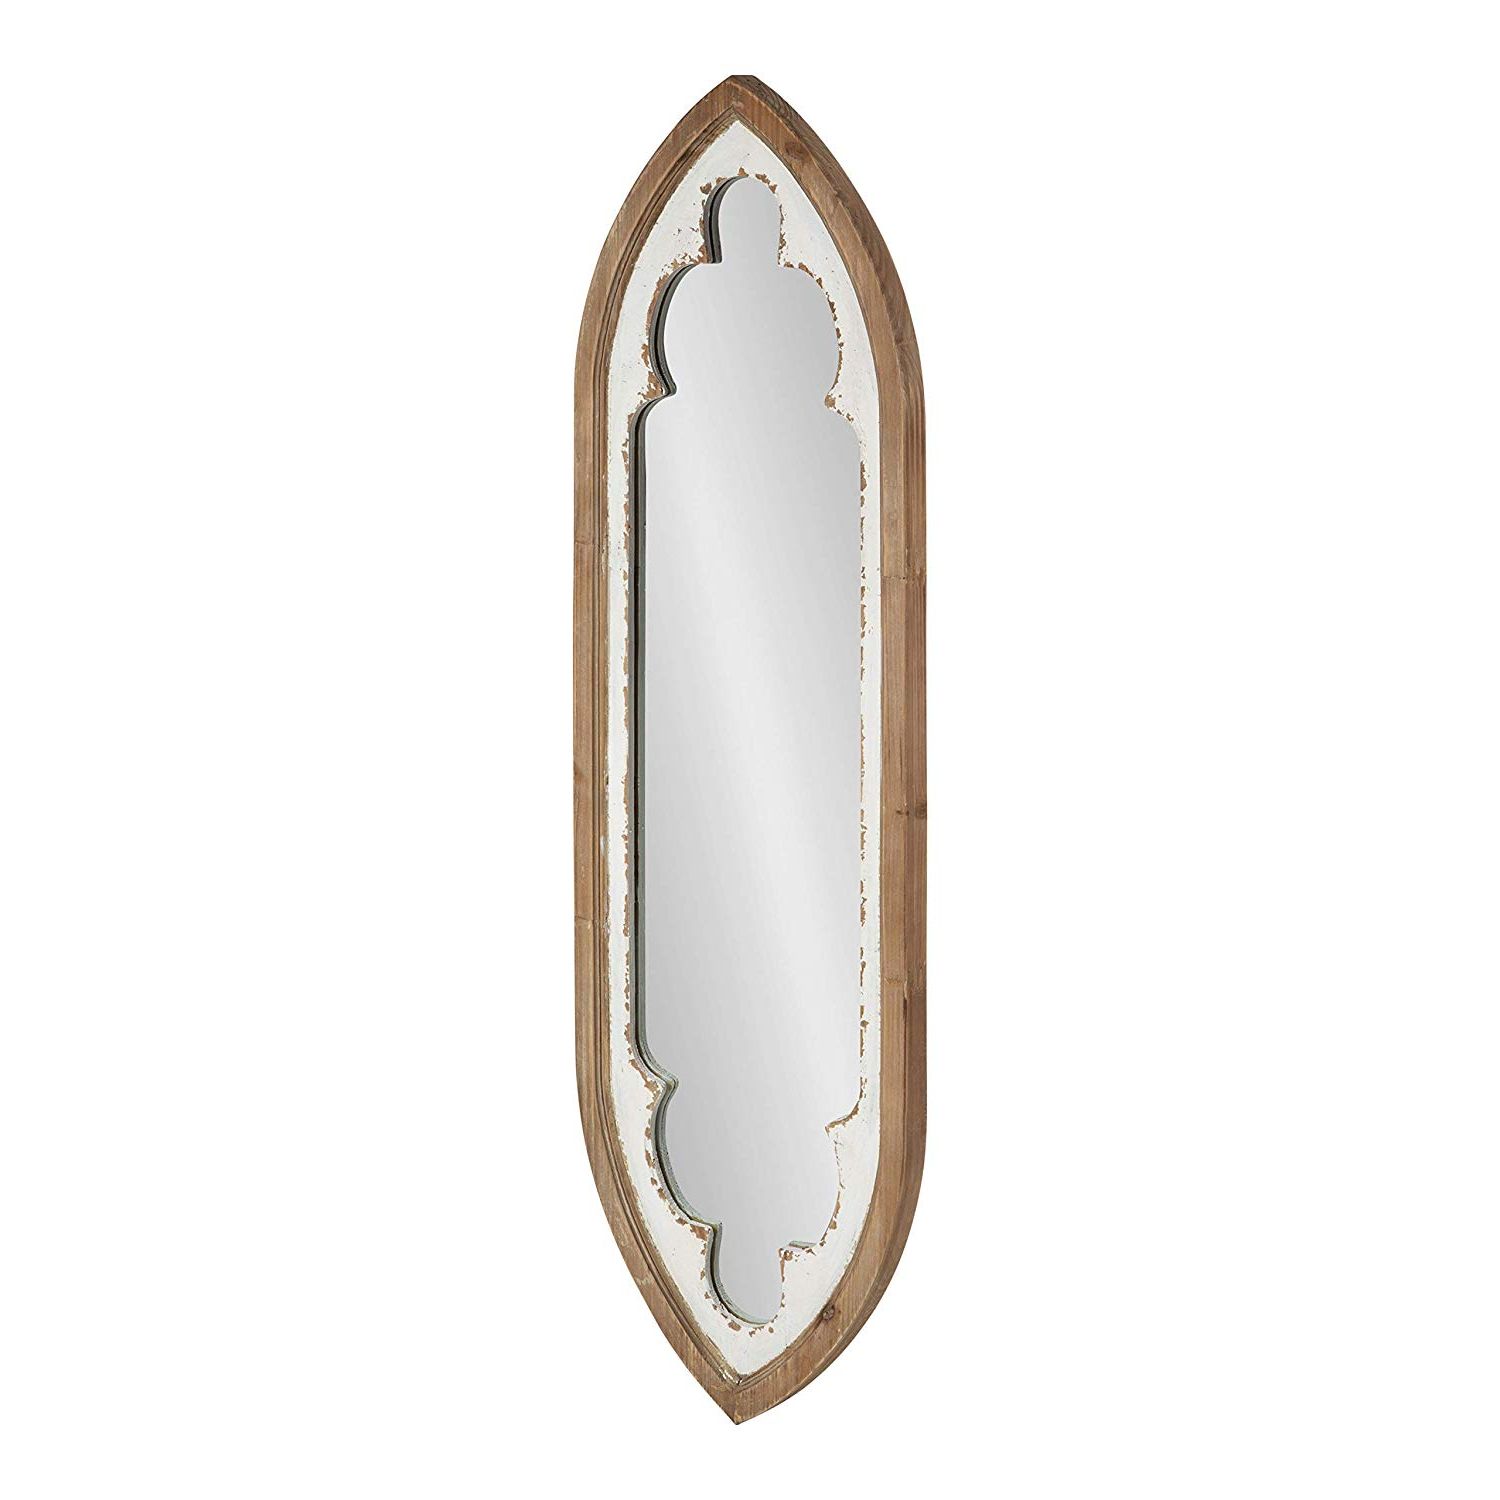 Trendy Kate And Laurel Manisha Shabby Chic Arch Wood Panel Wall Mirror, 13x43,  Brown And White Regarding Panel Wall Mirrors (View 20 of 20)